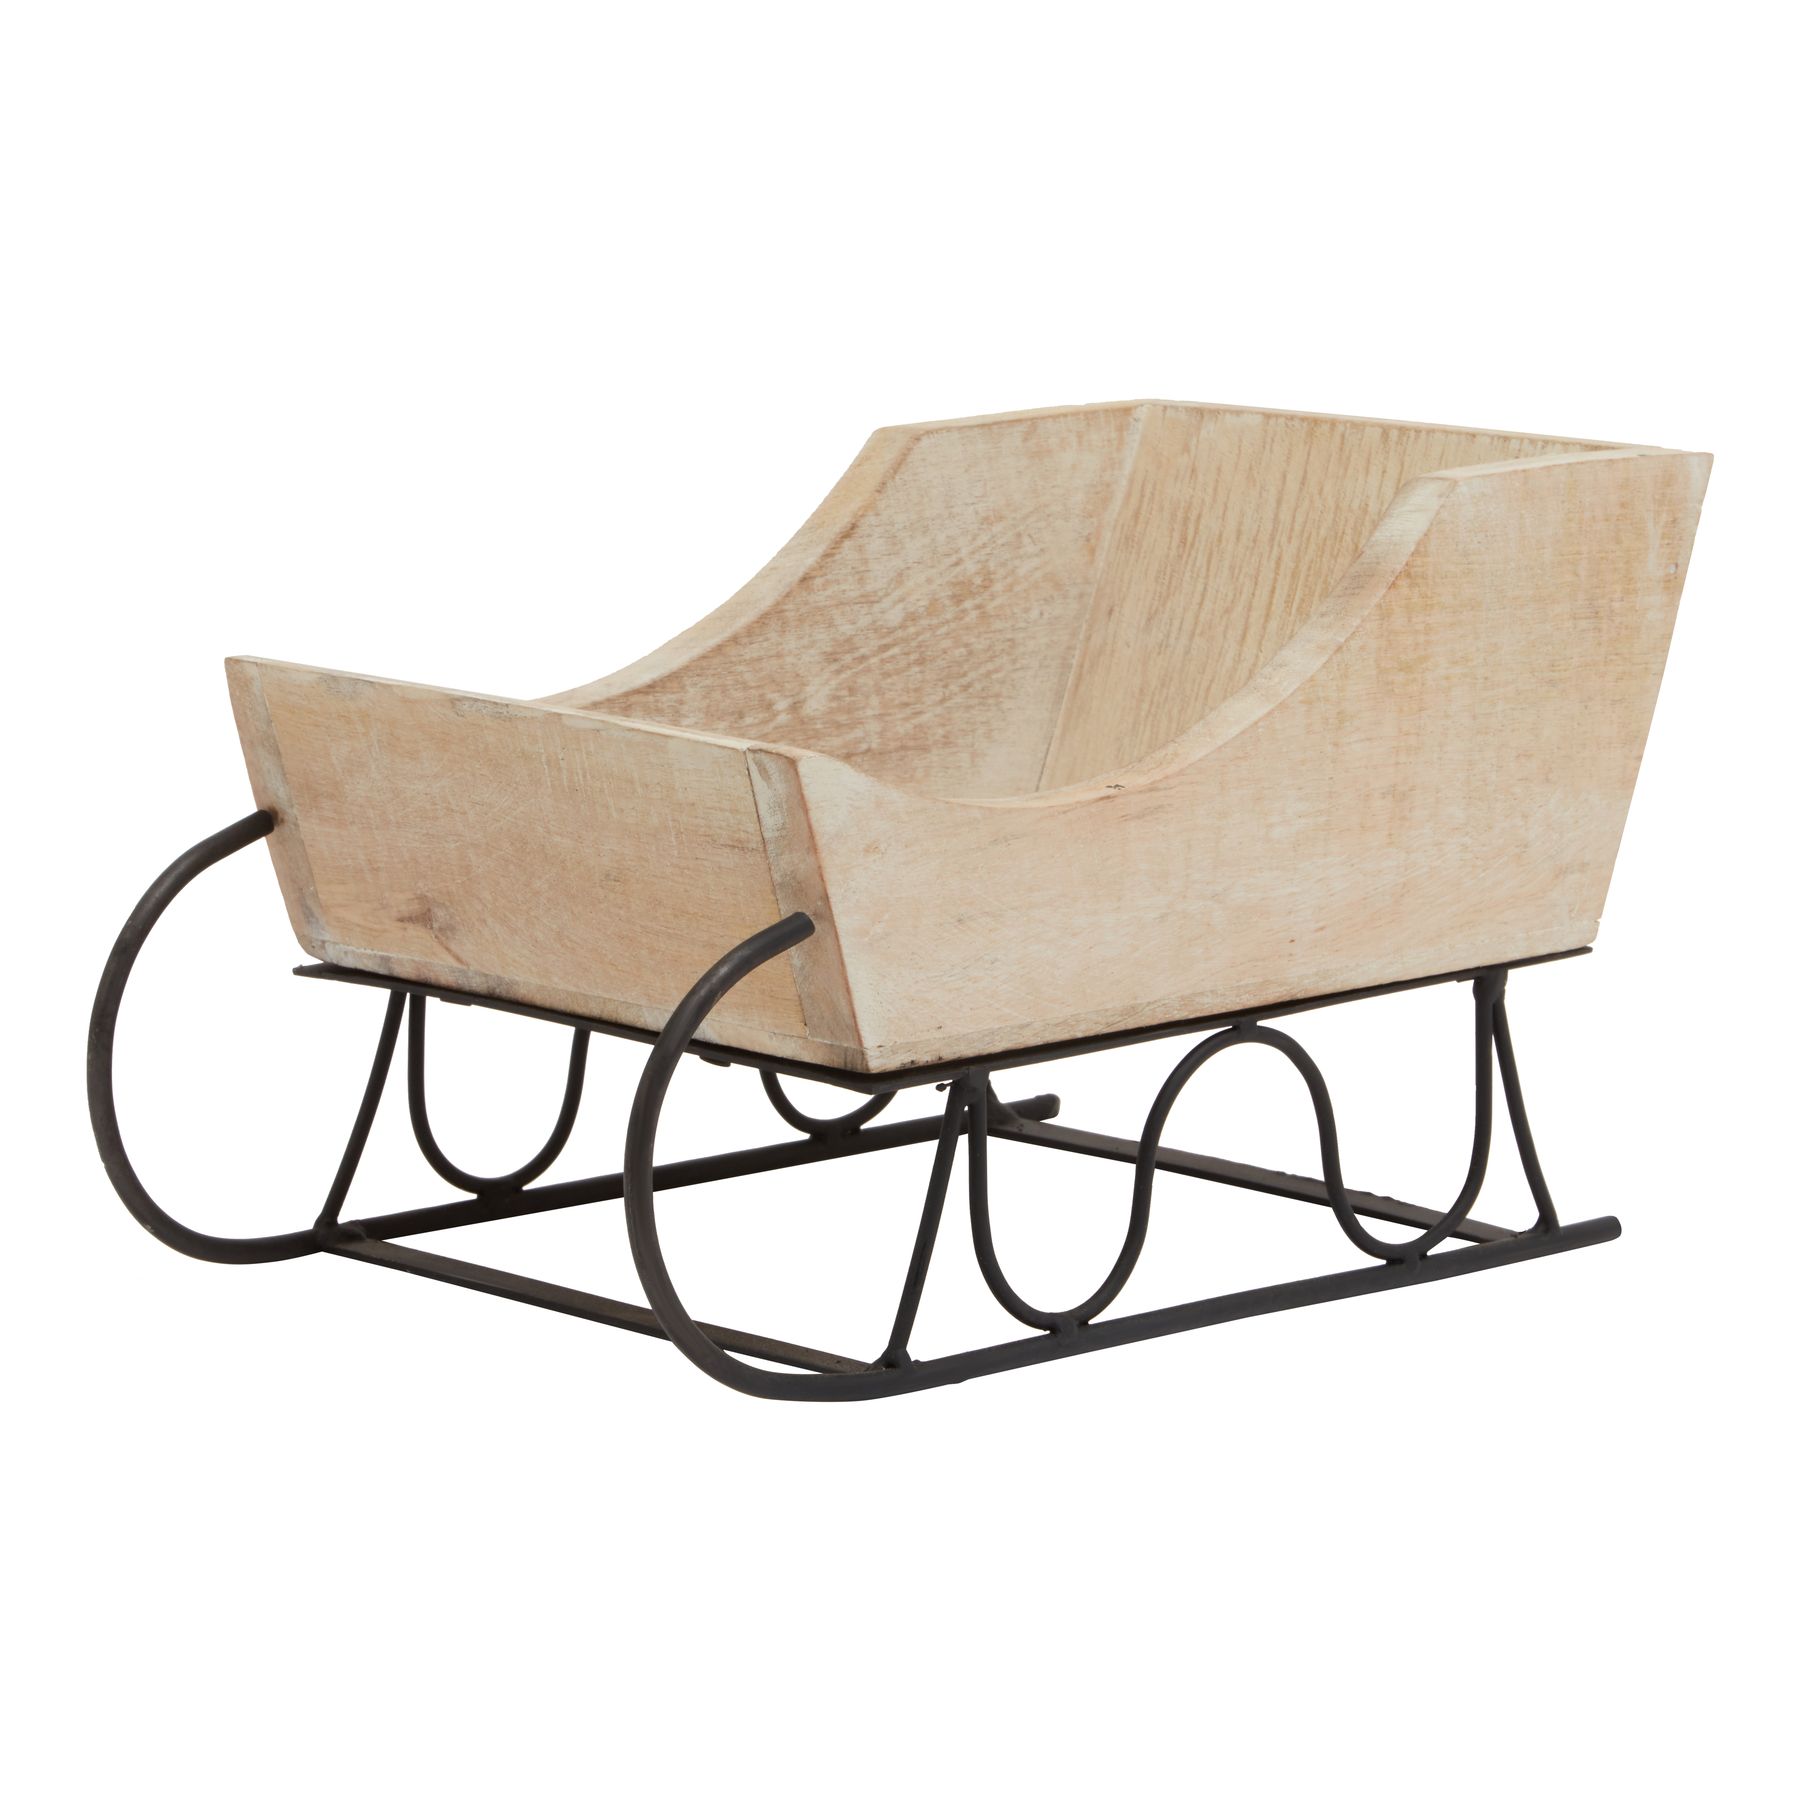 White Wash Collection Wooden Decorative Sleigh - Image 1